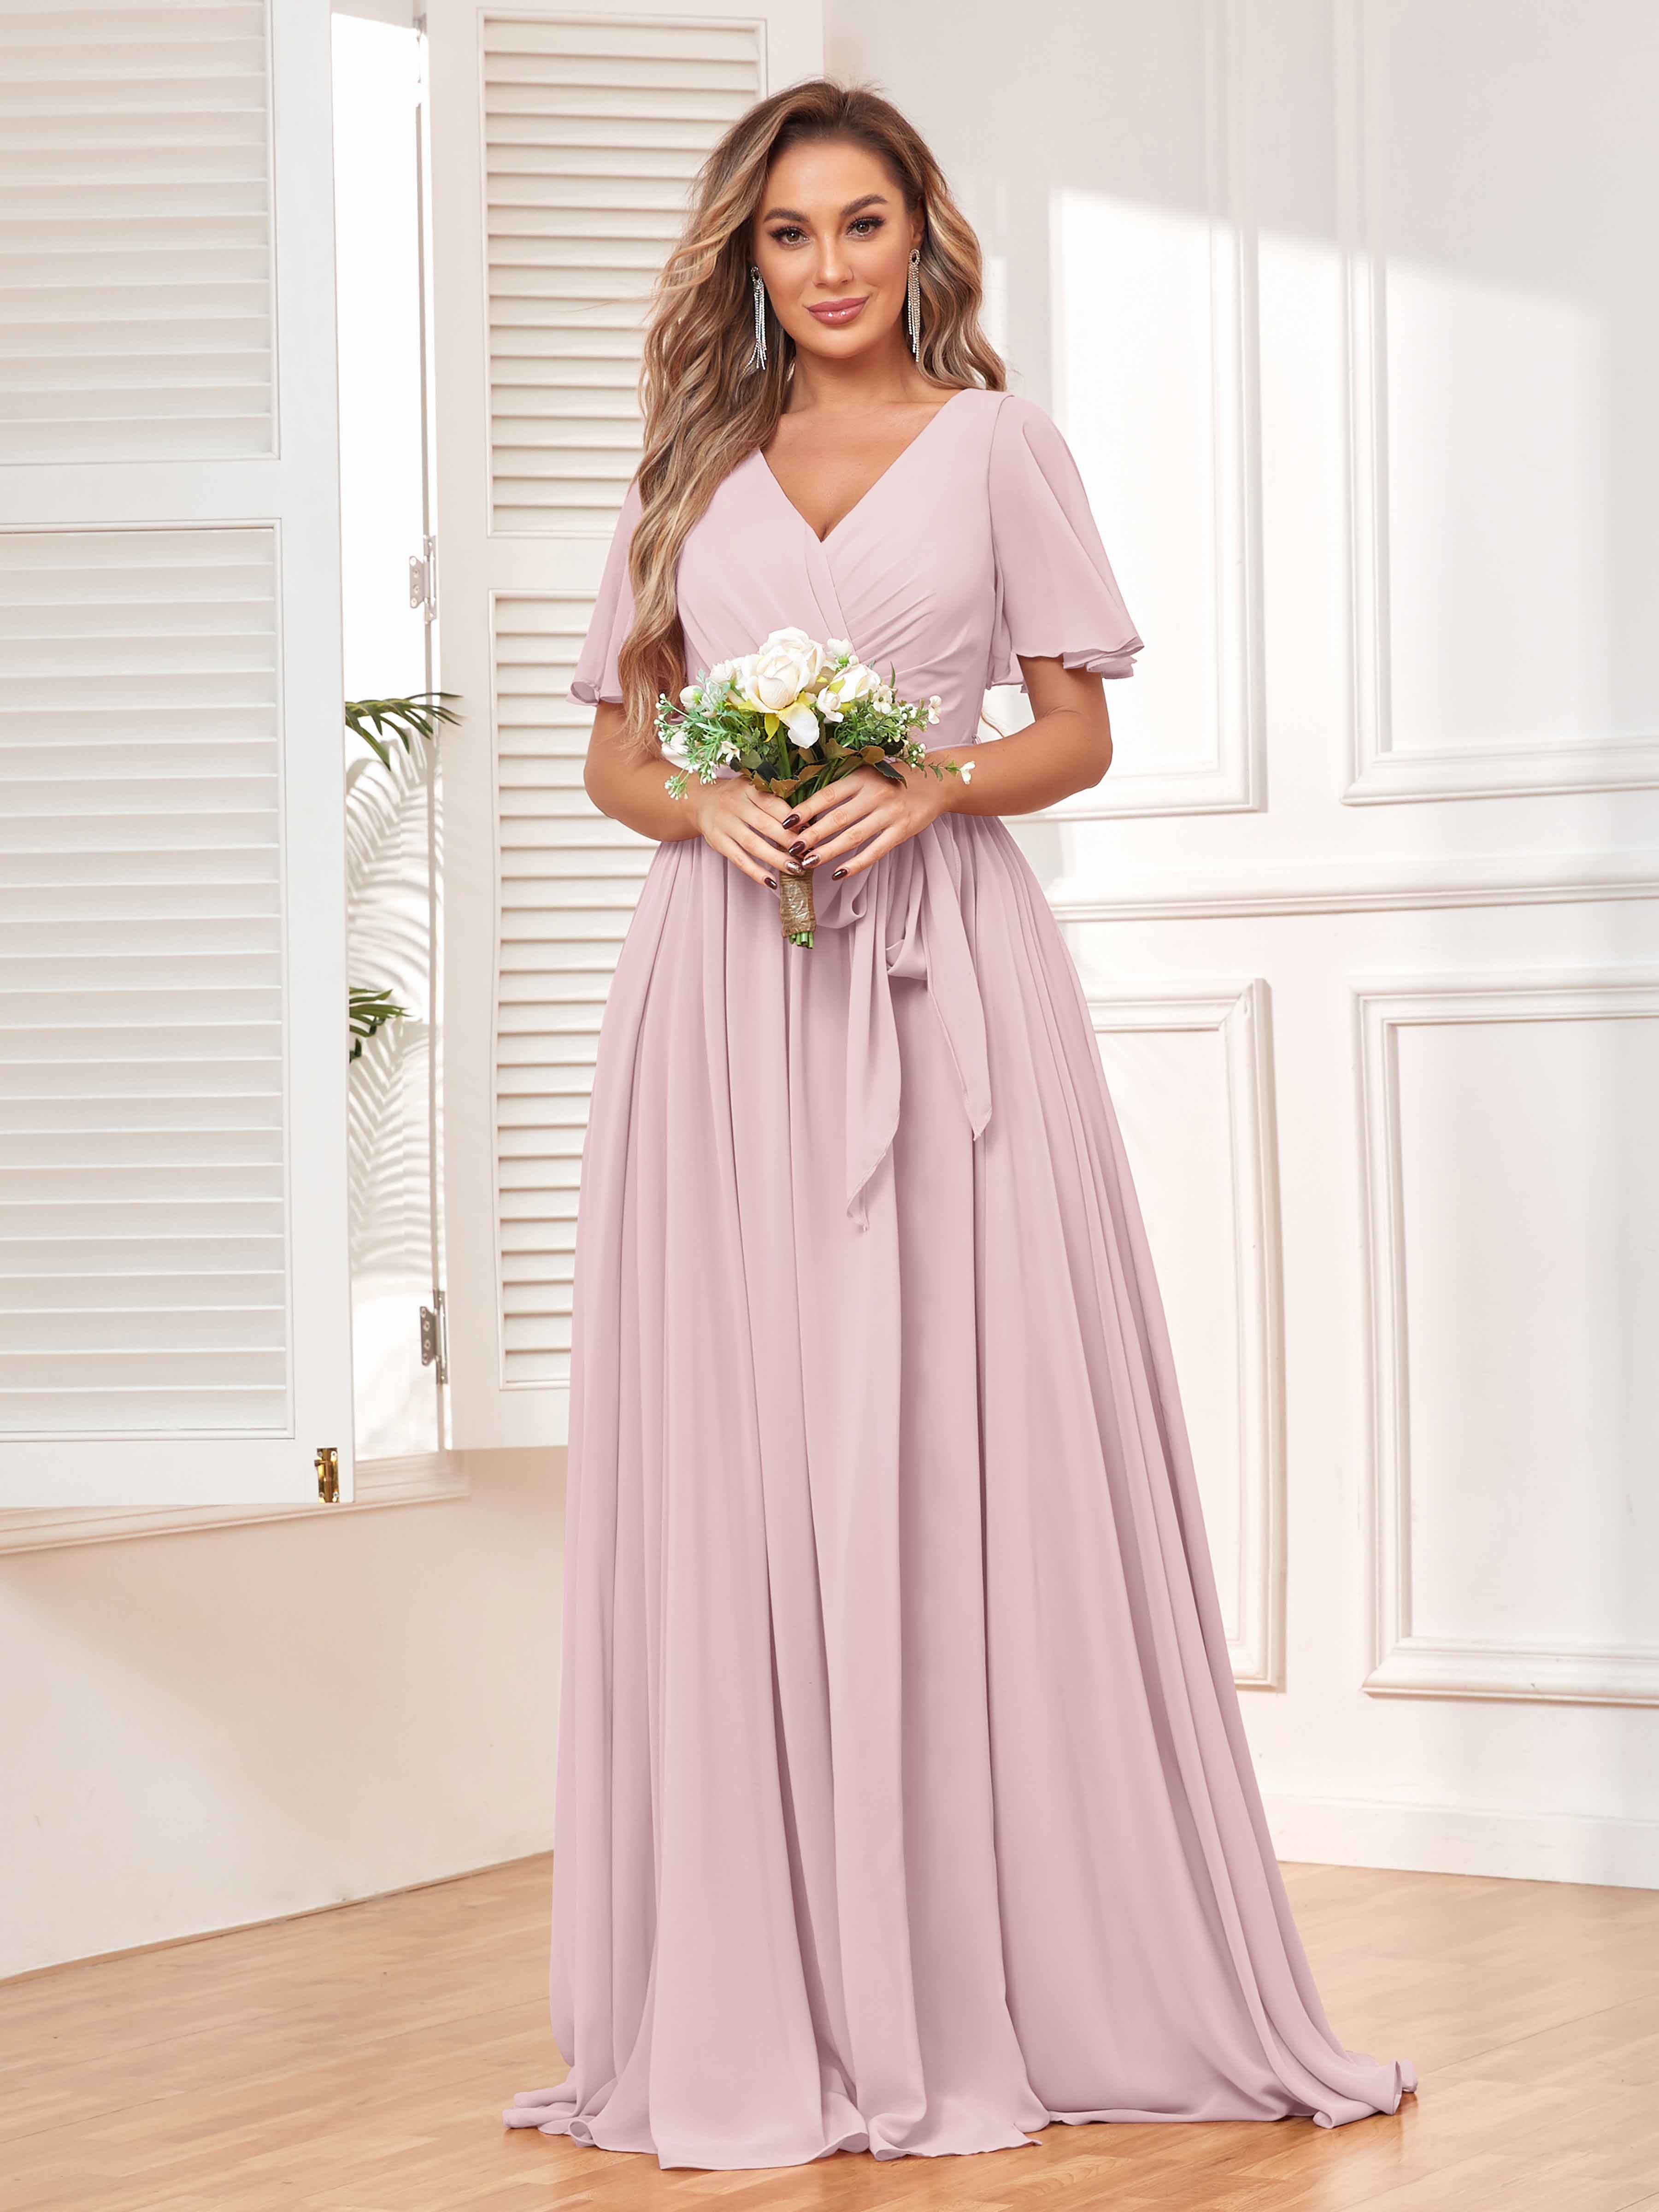 Find Your Perfect Dusty Purple Bridesmaid Dress in Pomuyoo - All Sizes